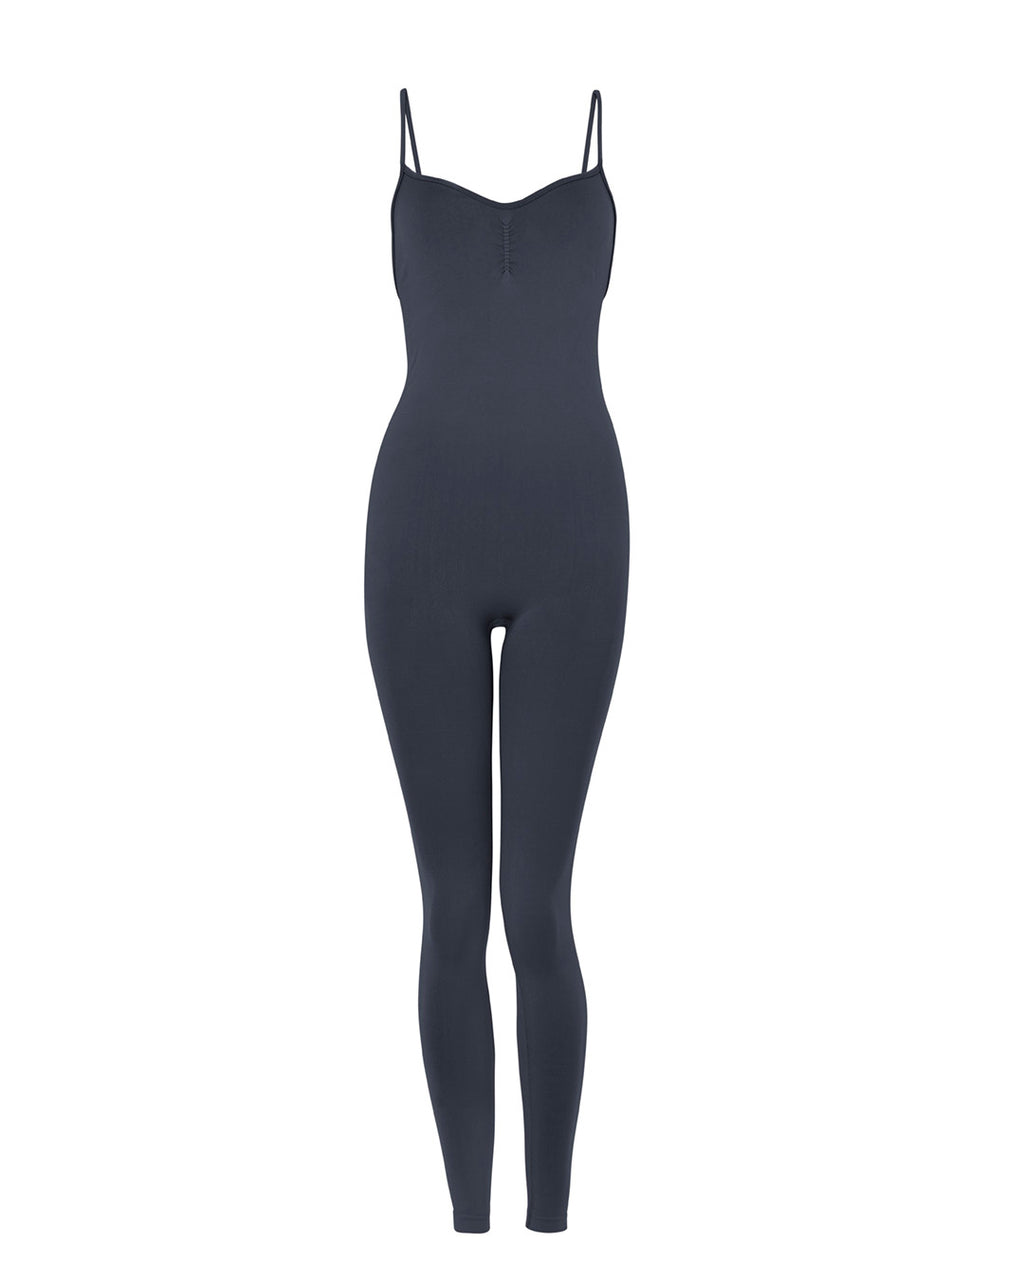 BALANCED Slate Grey Unitard, Ruched Detailing for Flattering Fit, Everyday to Gym PRISM² Fabric